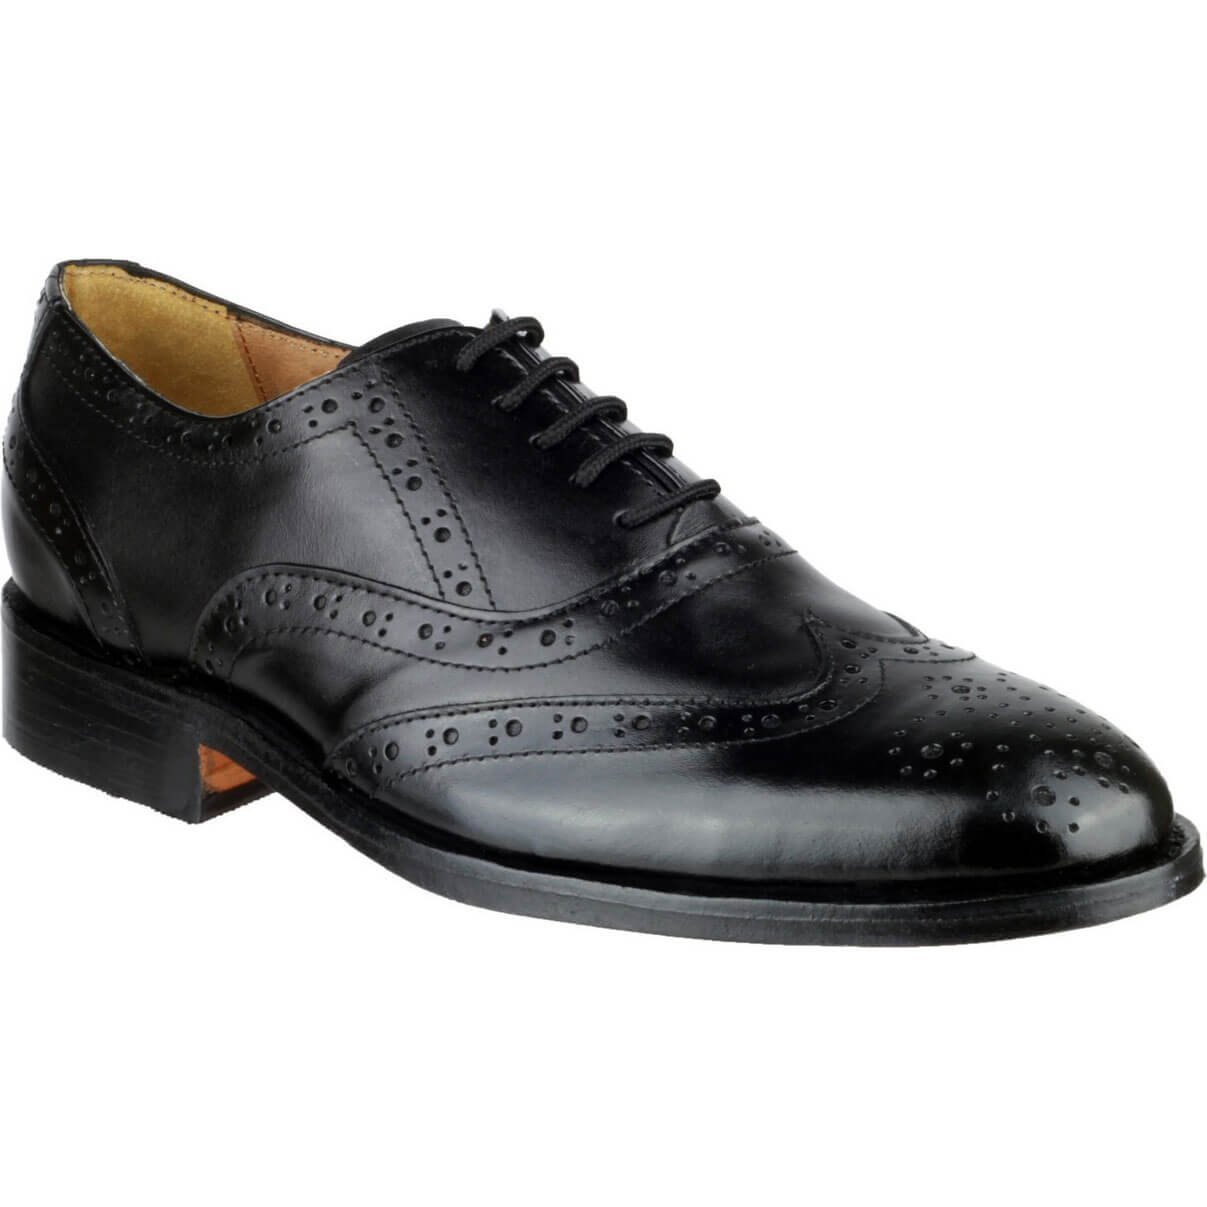 Image of Amblers Ben Leather Soled Oxford Brogue Black Size 13